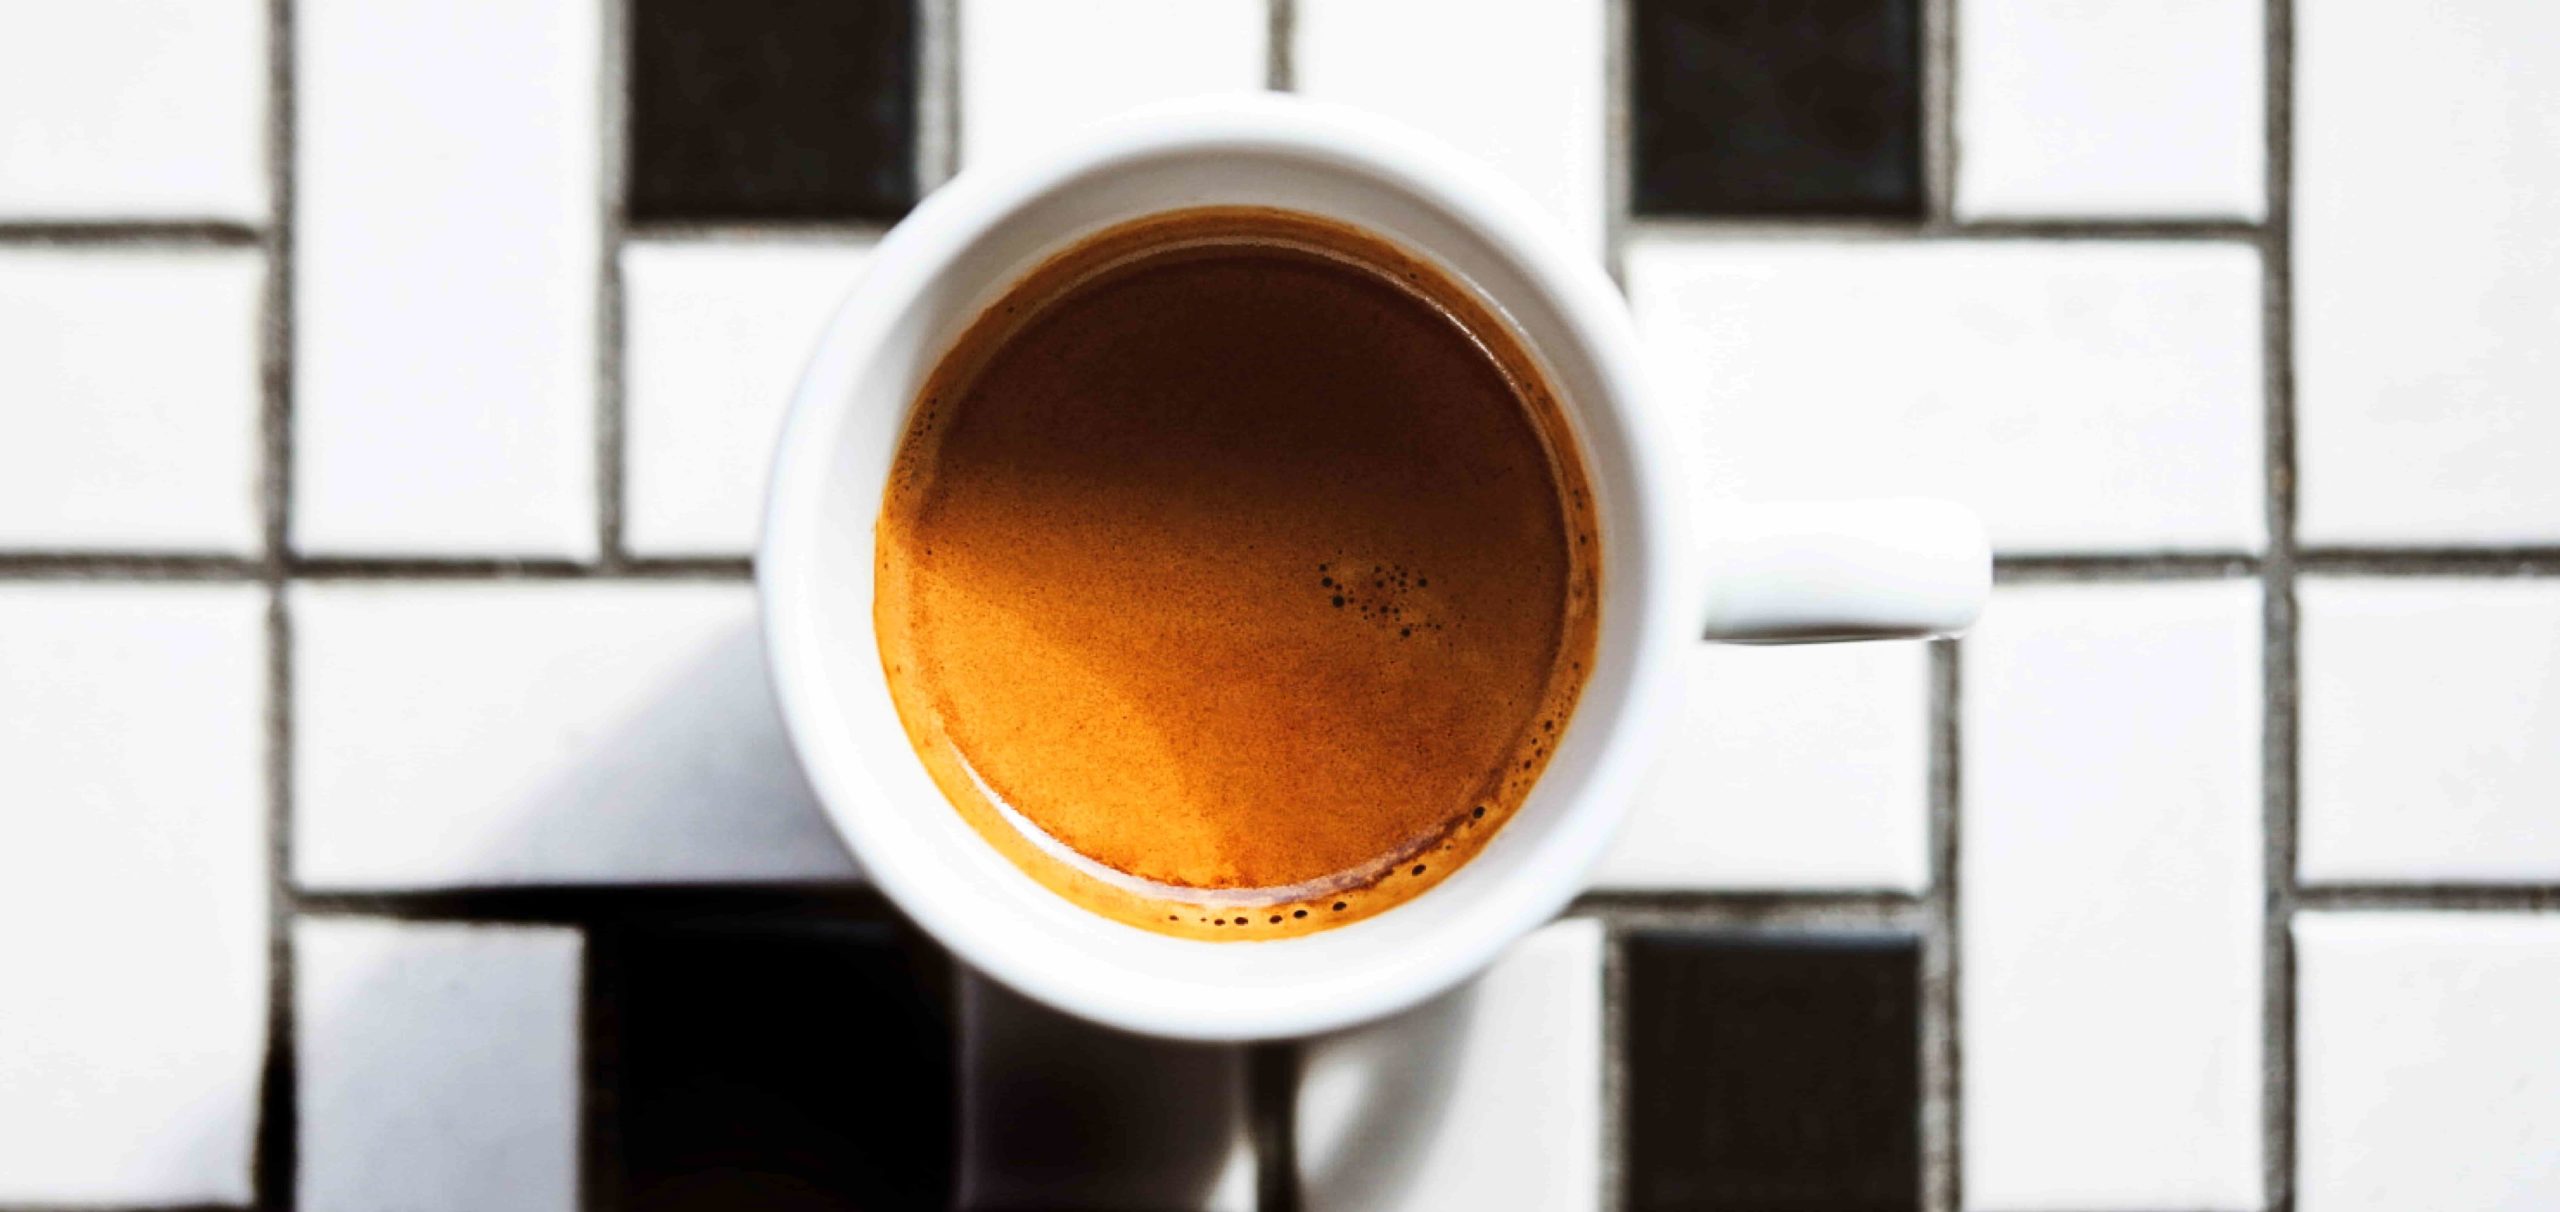 Specialty Coffee Espresso Shot On Top Of NYC Style Subway Tiles